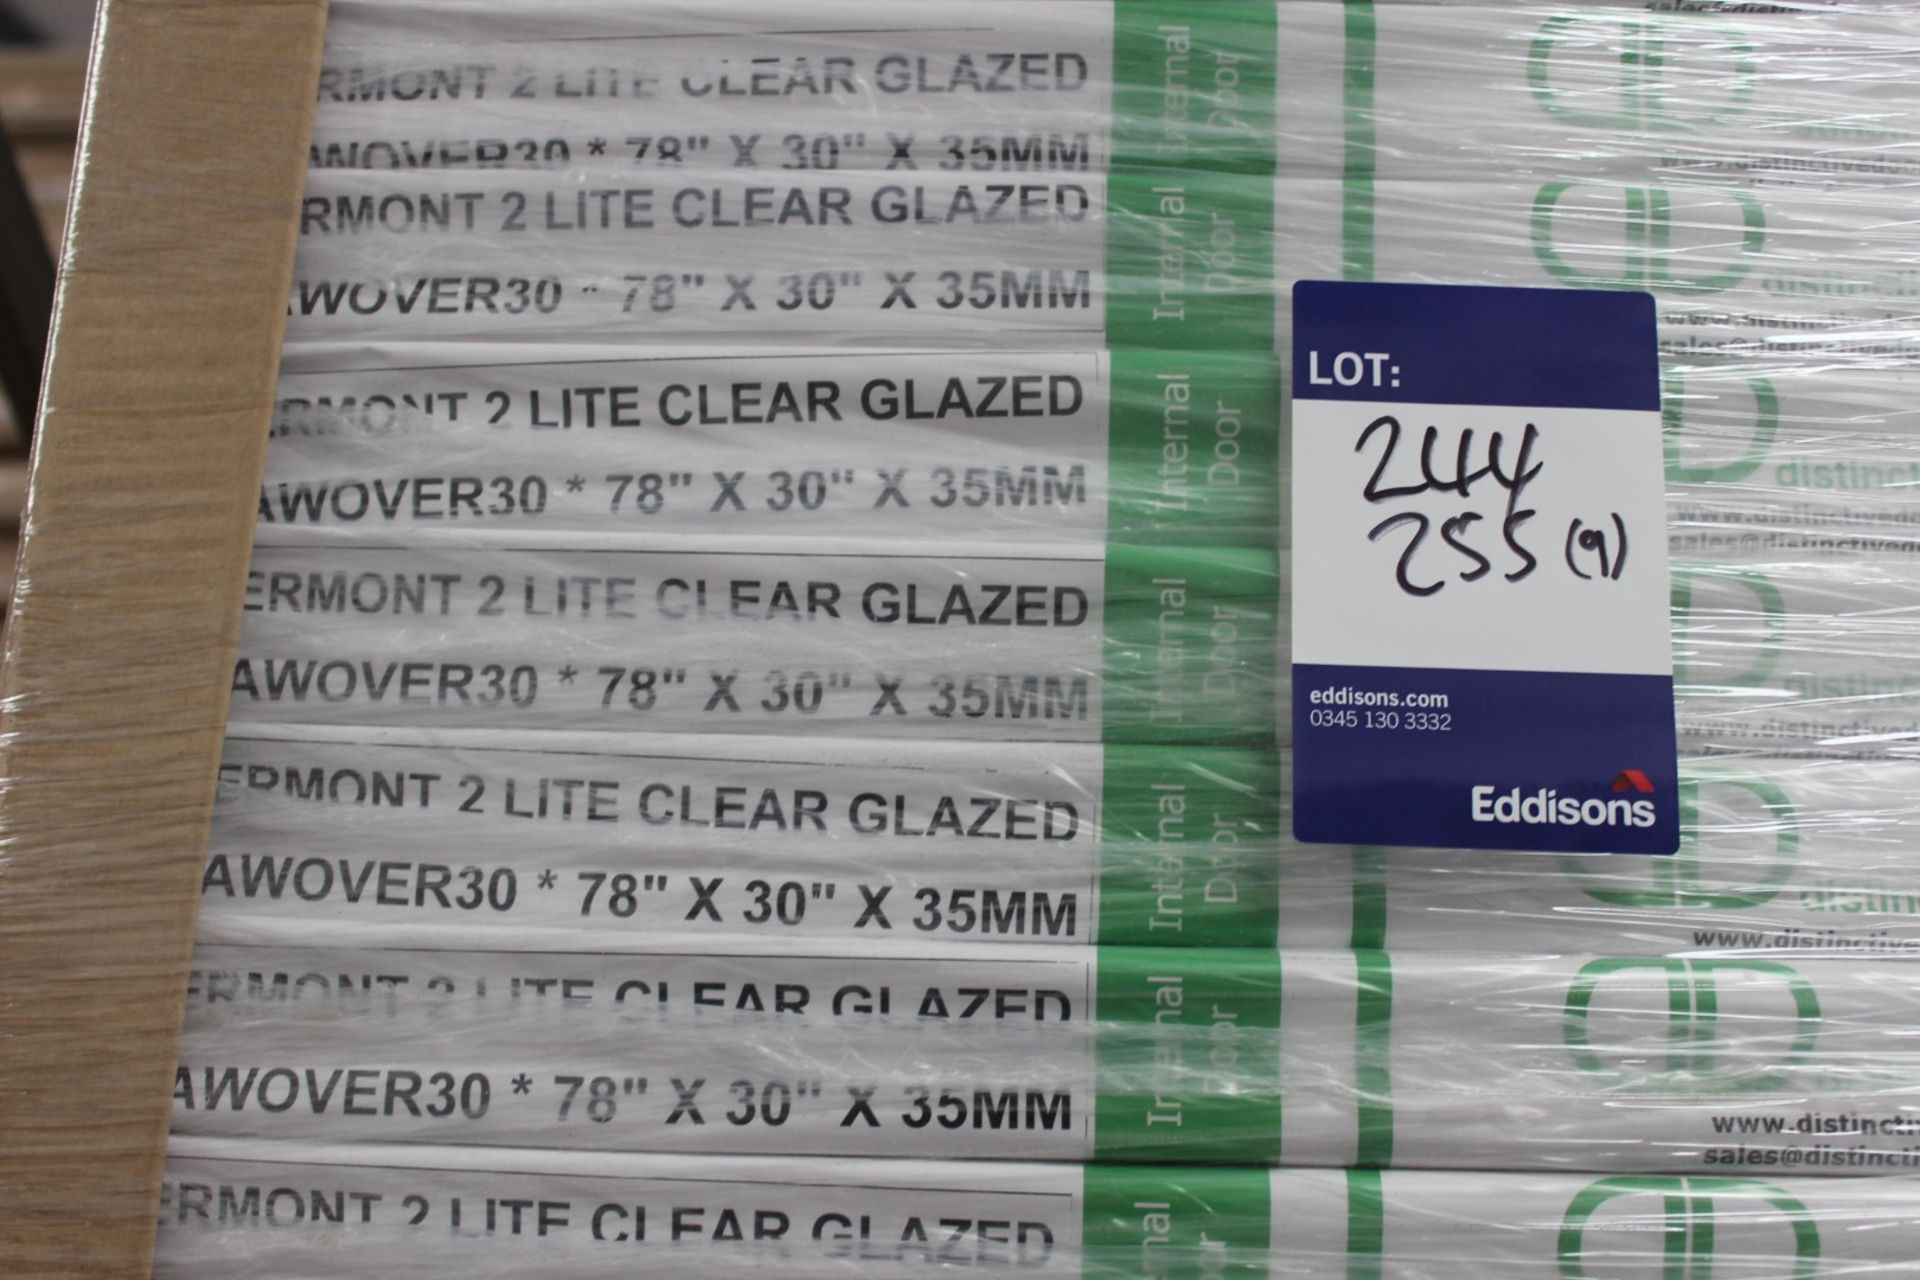 10 x Vermont 2 Lite Clear Glazer Internal, AWOVER 30, 78” X 30” X 35mm - Lots to be handed out in - Image 3 of 3